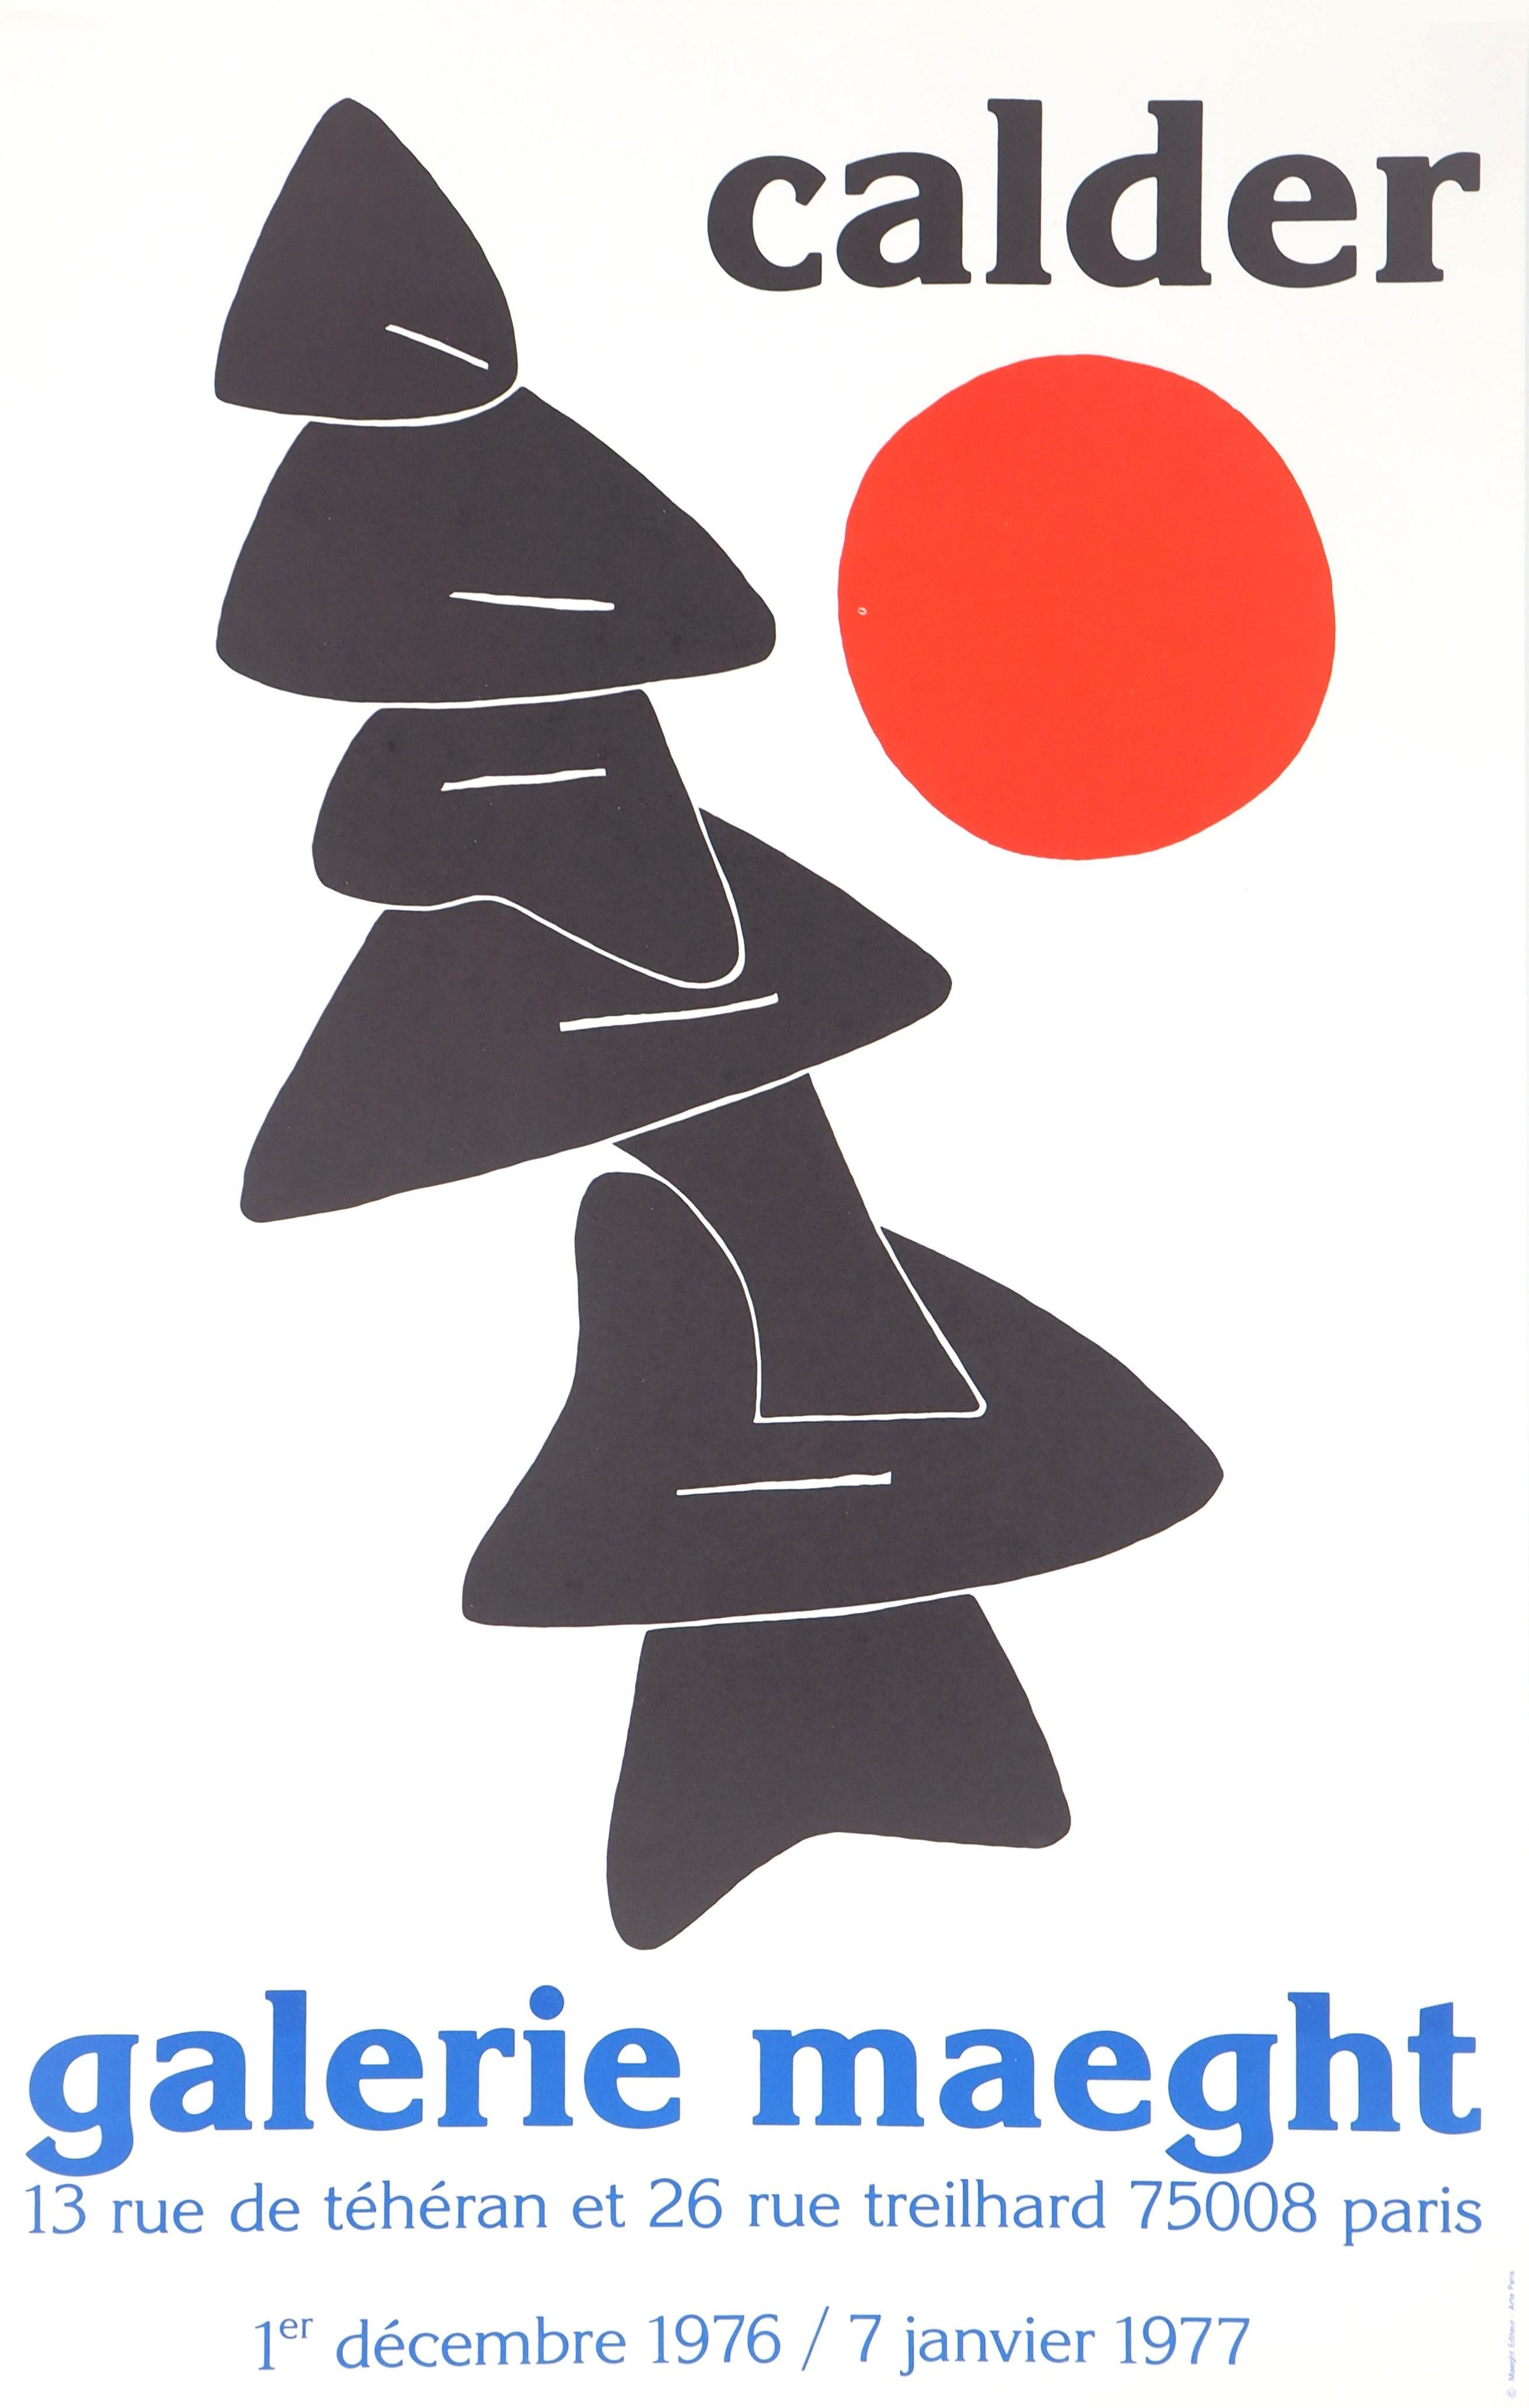 Black Tree with Red Sun - Lithograph poster - Maeght, 1976-77